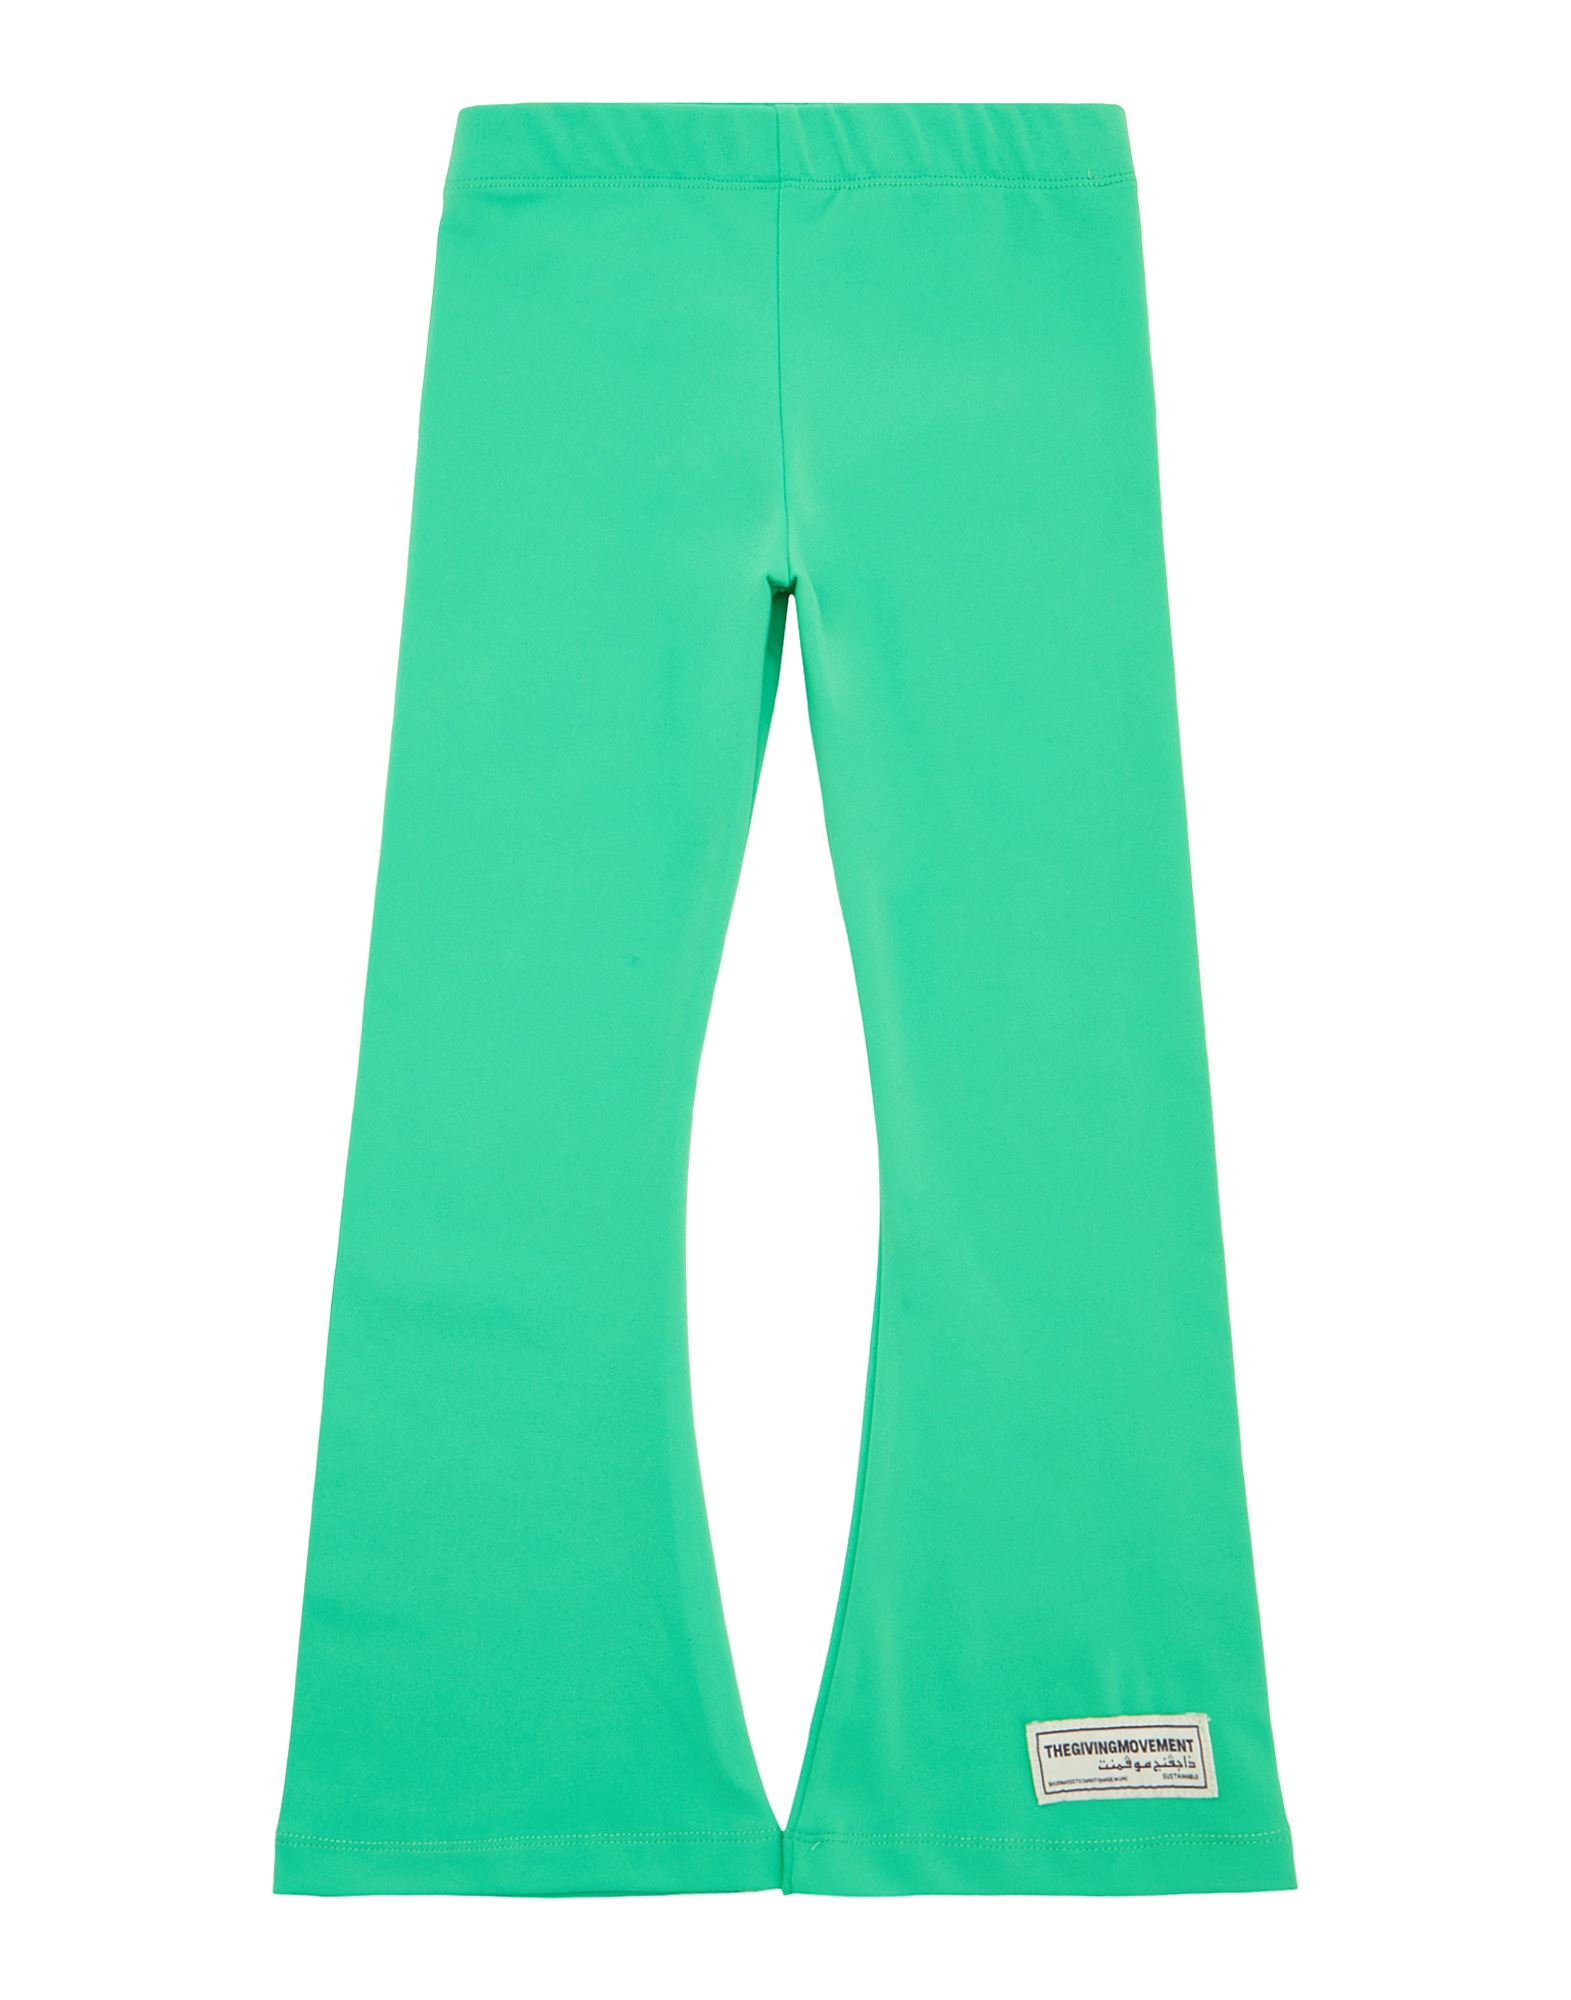 The Giving Movement X Yoox Kids' Pants In Green